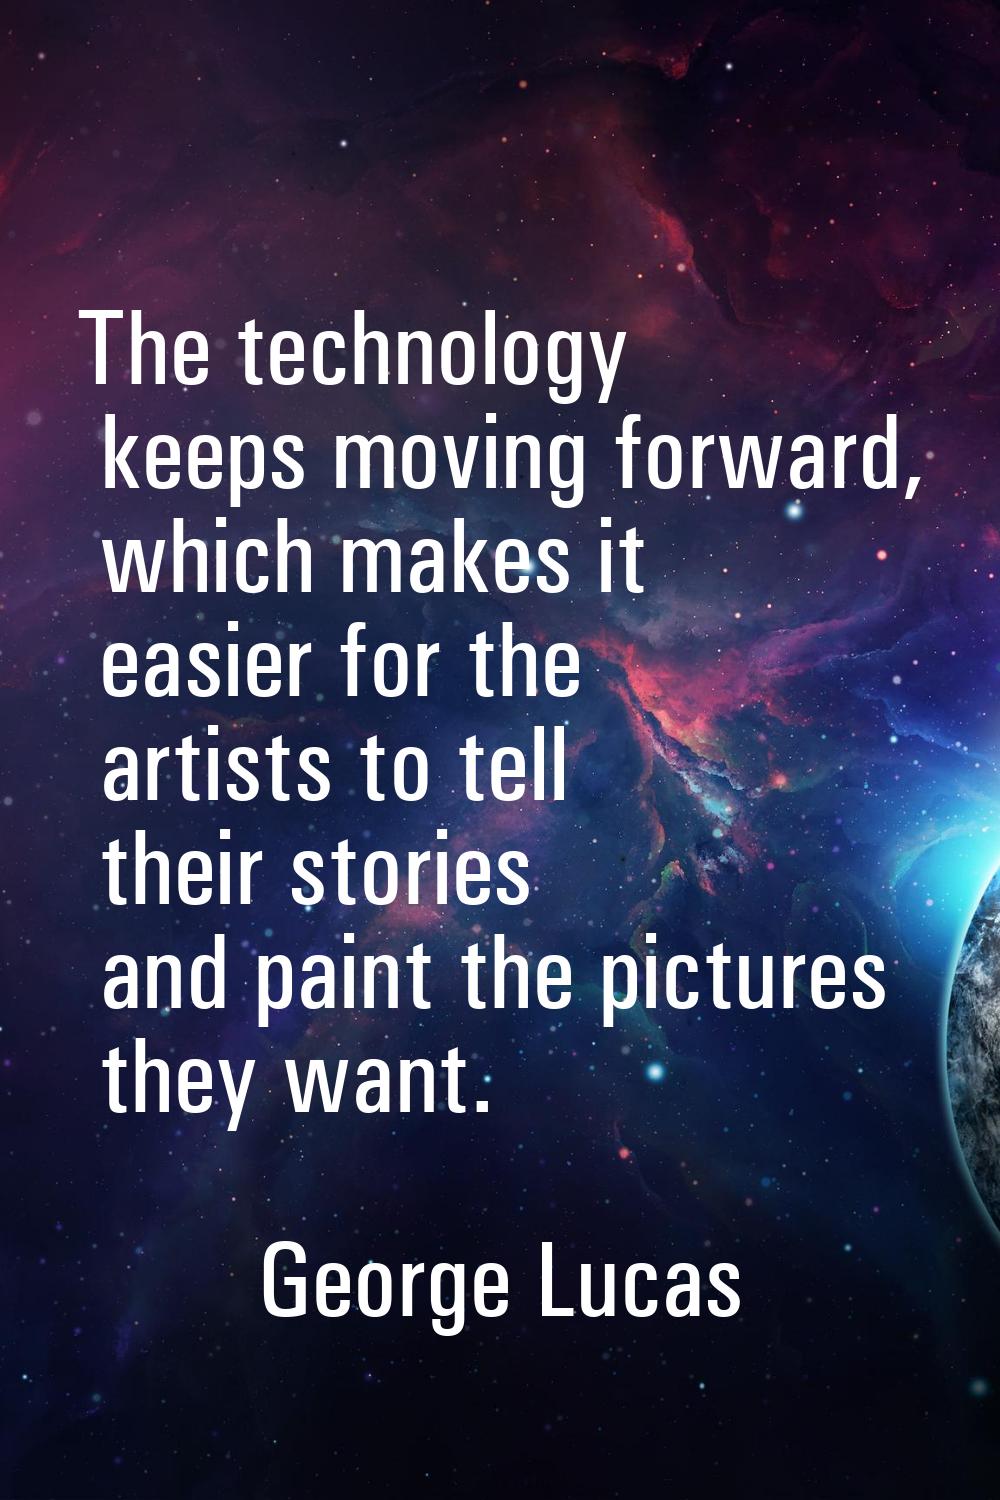 The technology keeps moving forward, which makes it easier for the artists to tell their stories an